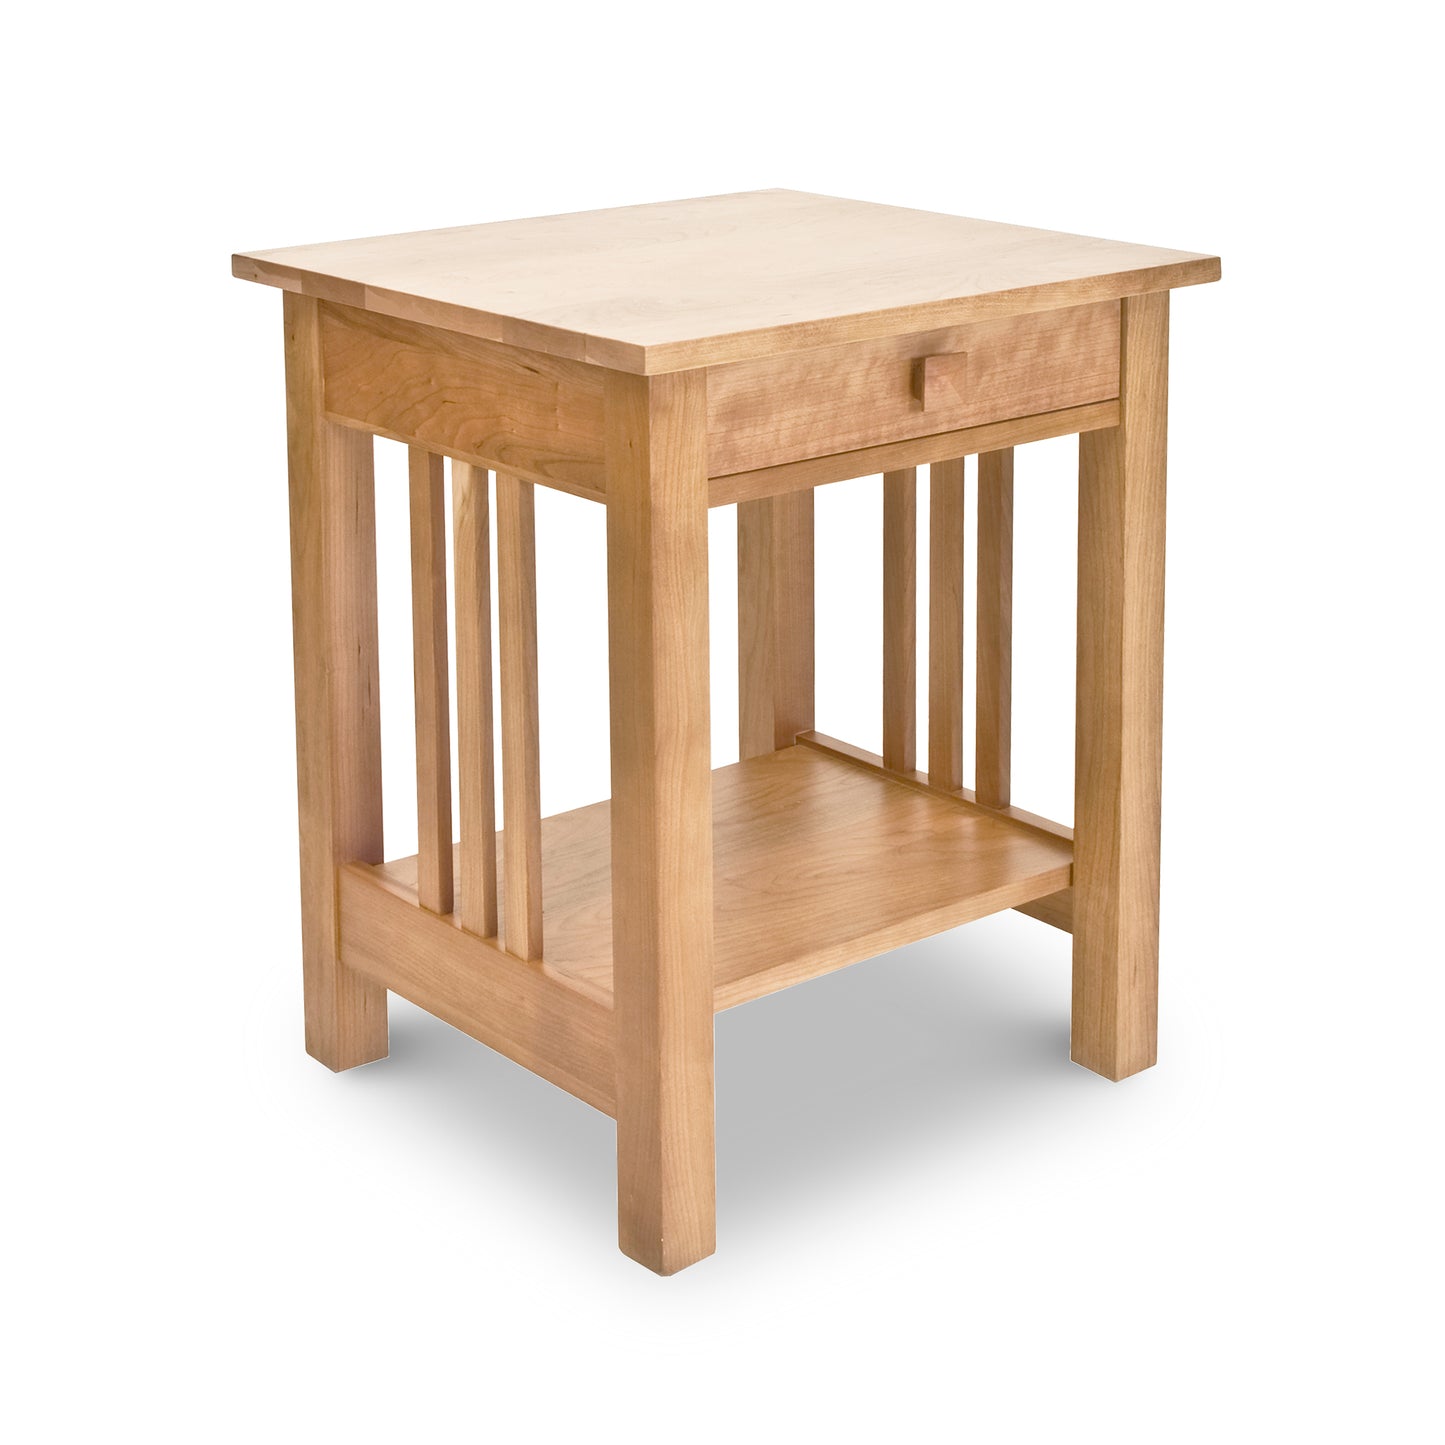 A small solid wood side table with a shelf, perfect as a Lyndon Furniture American Mission nightstand.